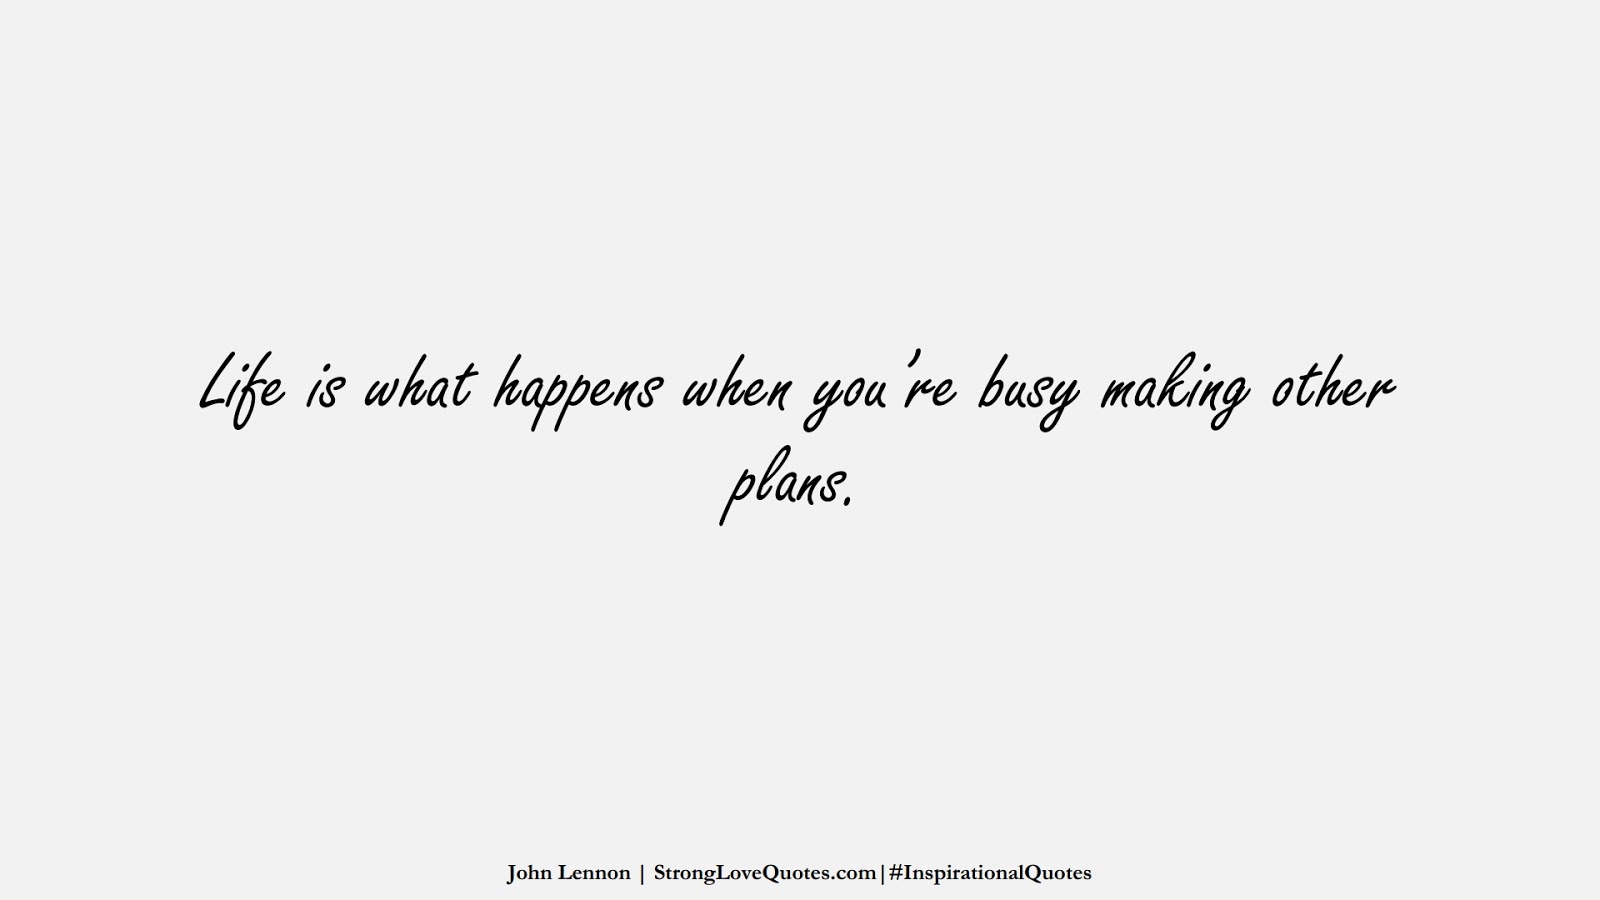 Life is what happens when you’re busy making other plans. (John Lennon);  #InspirationalQuotes